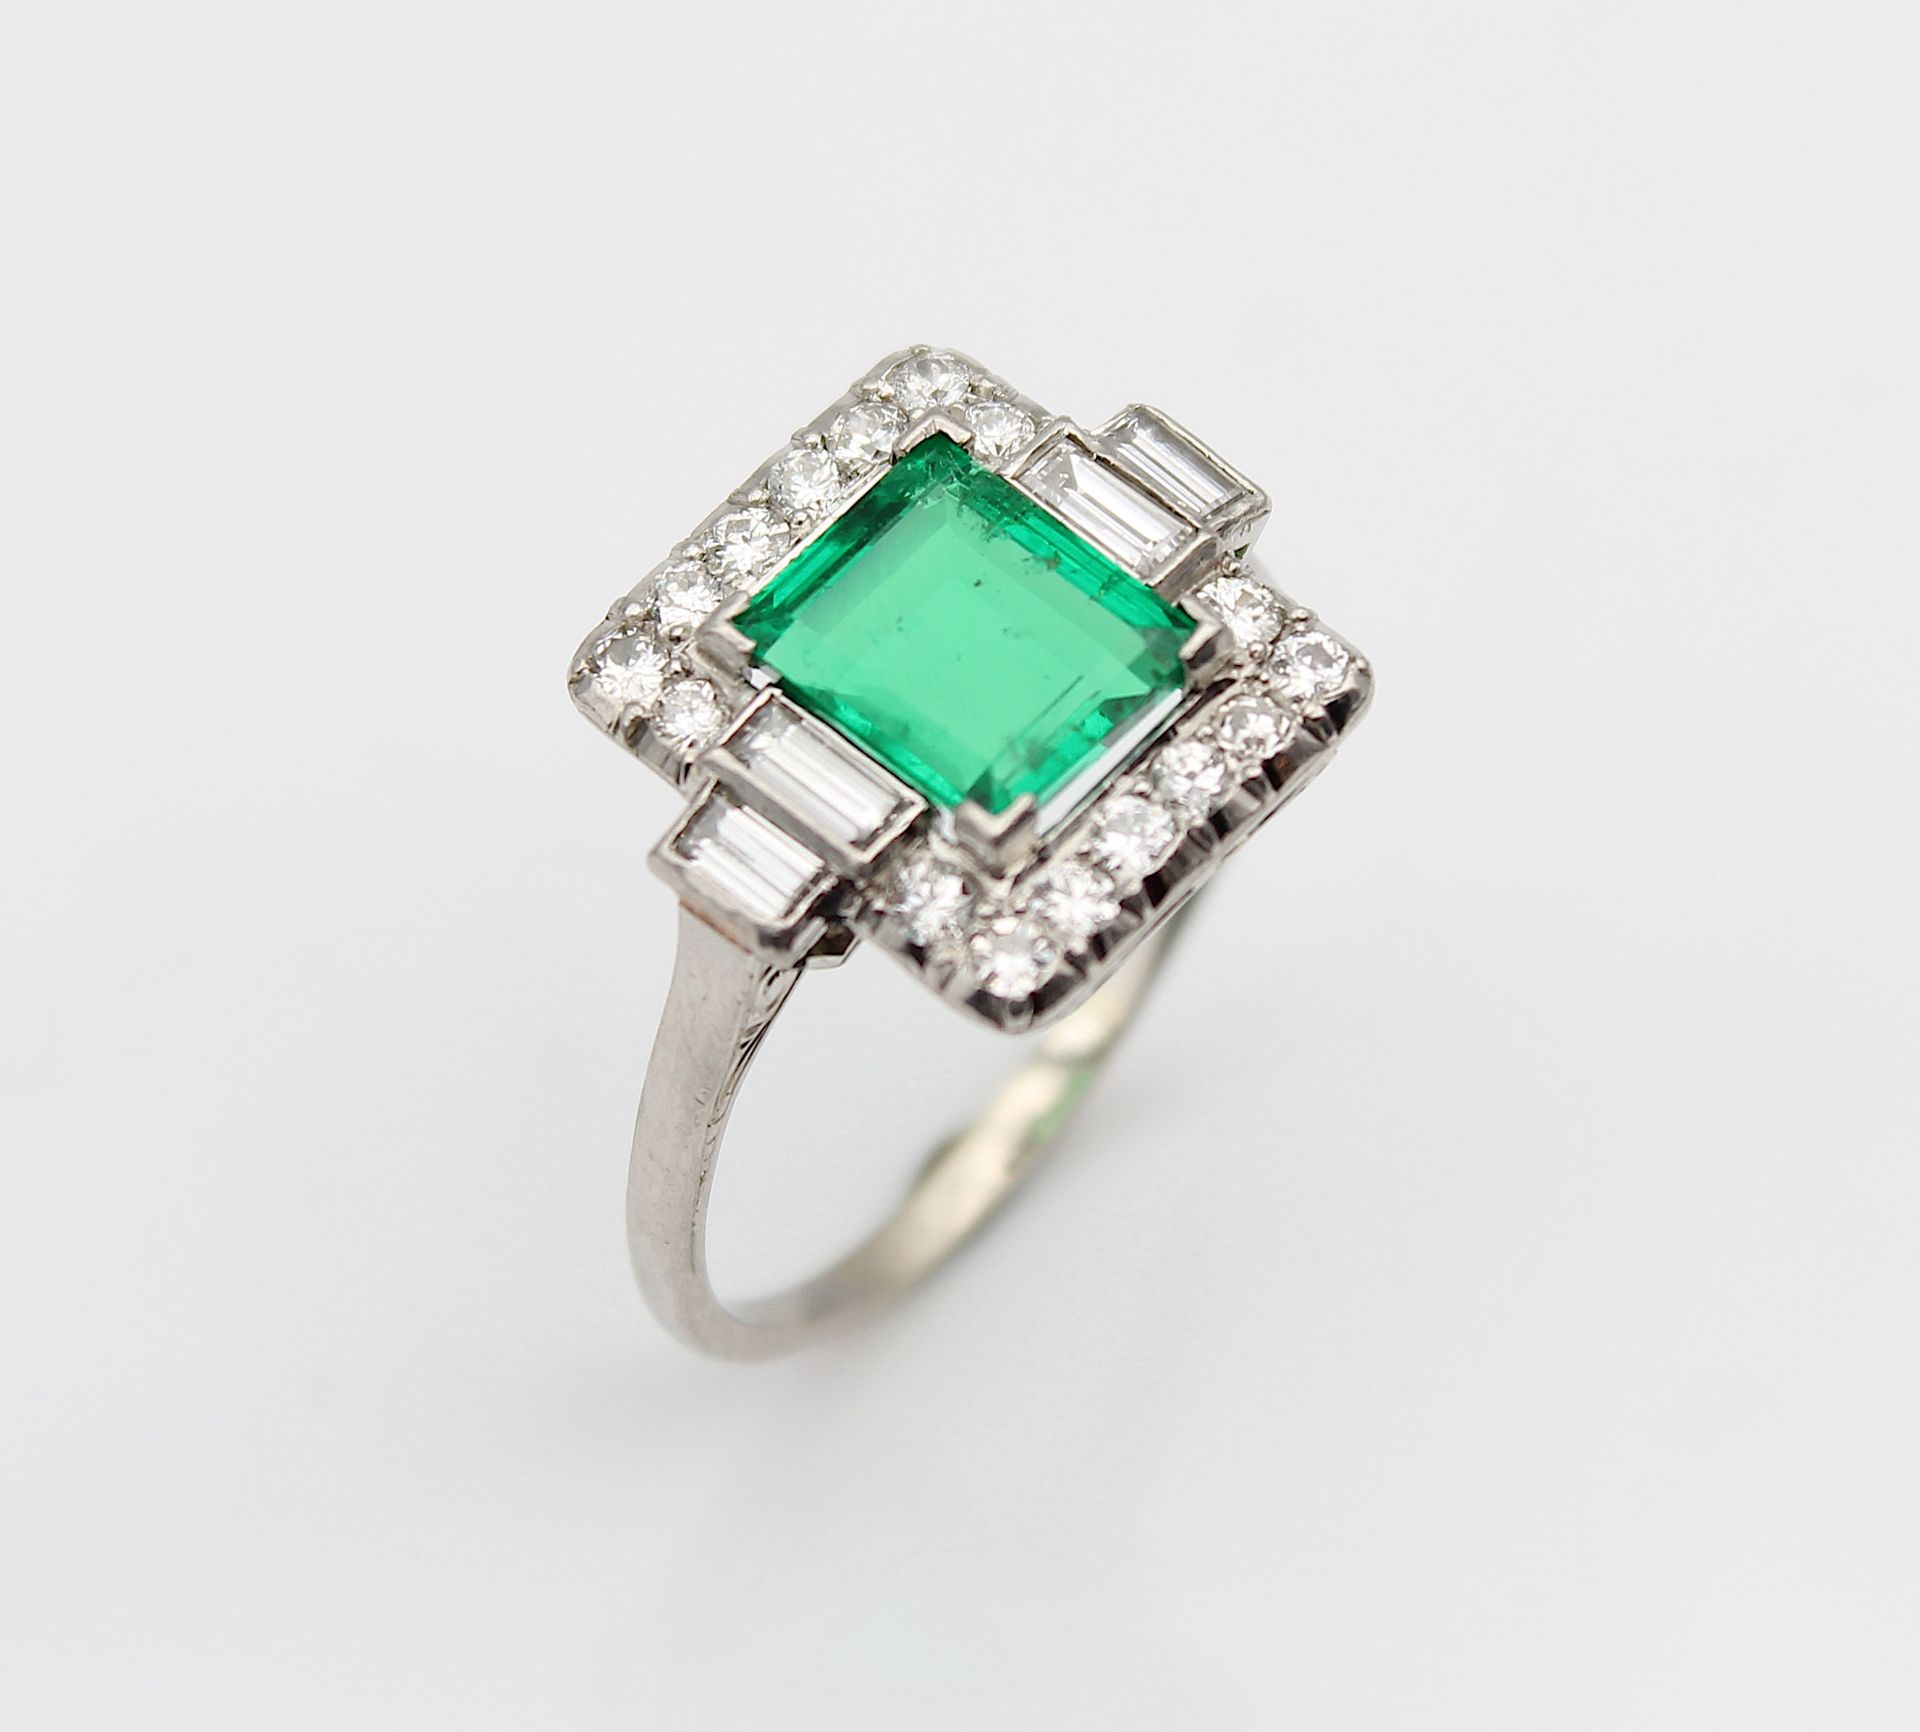 Platinum ring with an emerald and diamonds - Image 3 of 4